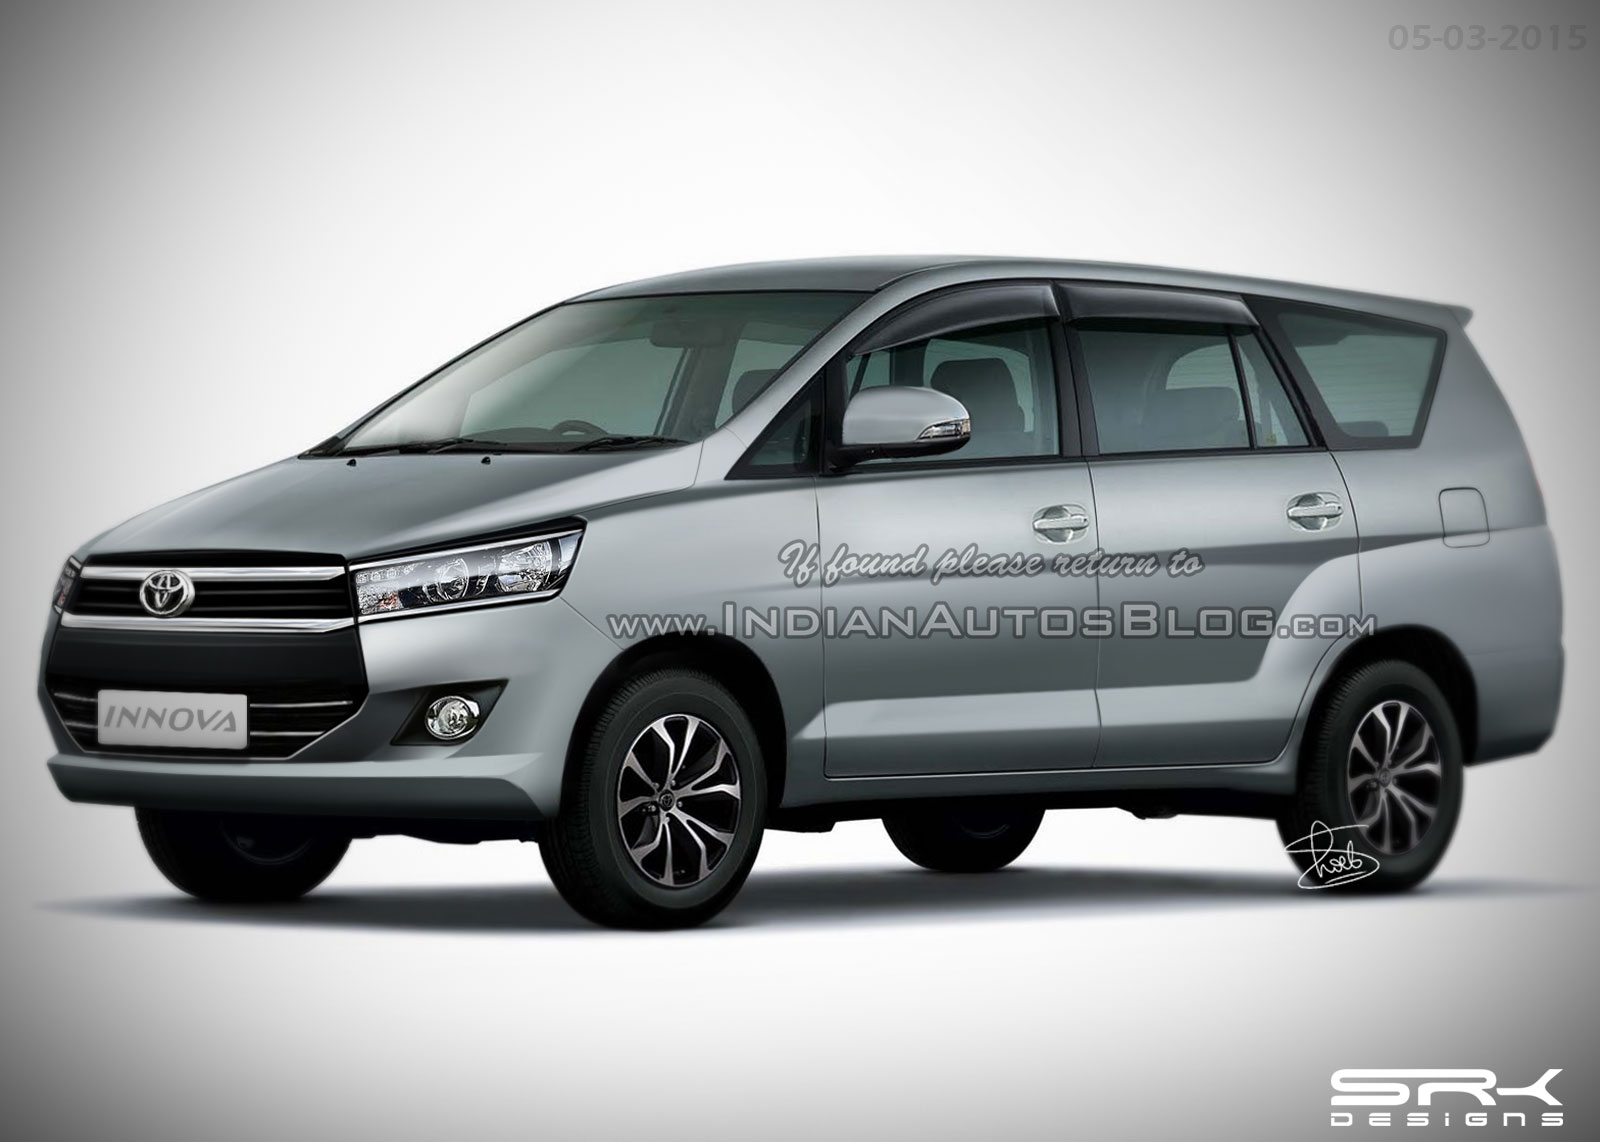 2016 Toyota Innova Rendering With All New Styling